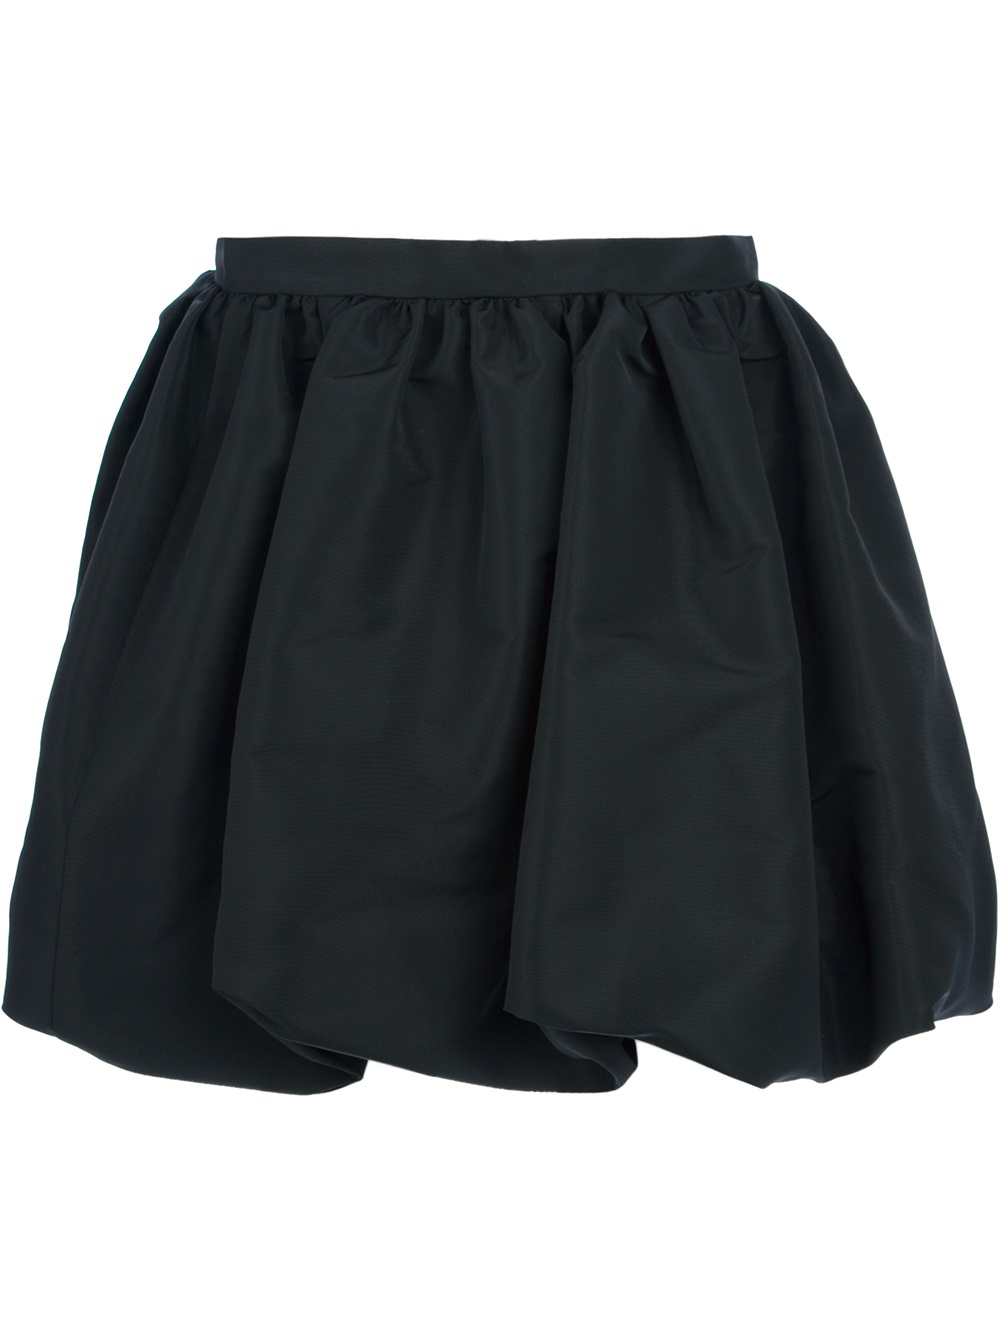 Lyst - Red Valentino Puffball Skirt in Black